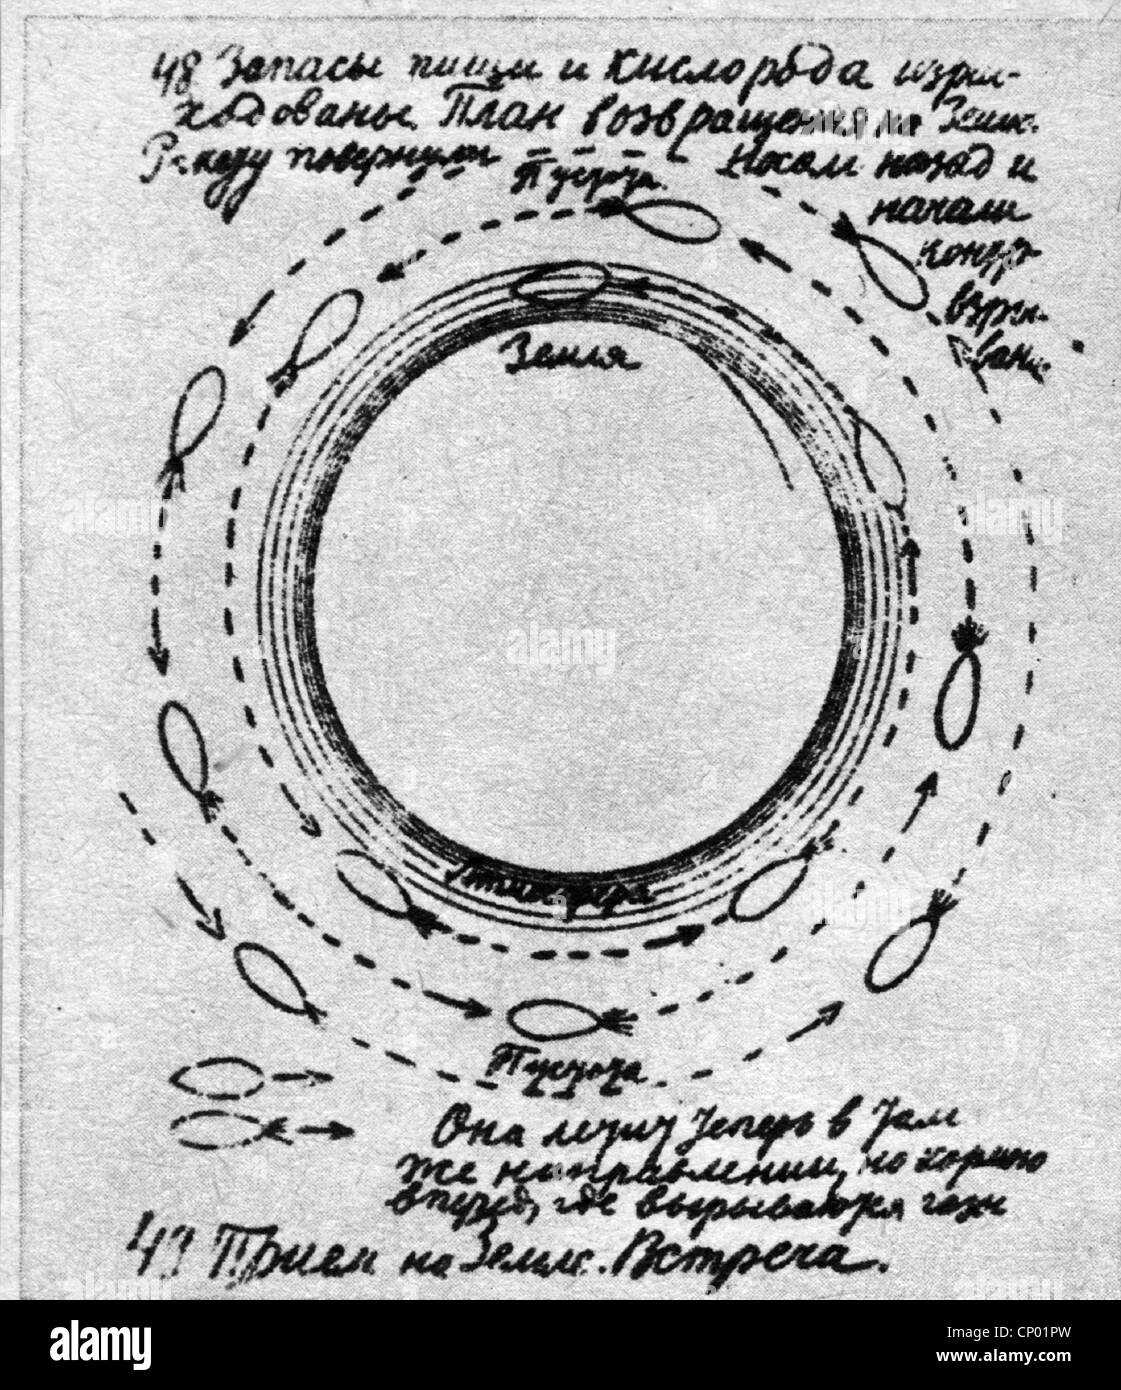 Tsiolkovskii, Konstantin Eduardovich, 17.9.1857 - 19.9.1935, Russian physicist, mathematician, page from one his his manuscripts, sketch of an orbit, Stock Photo